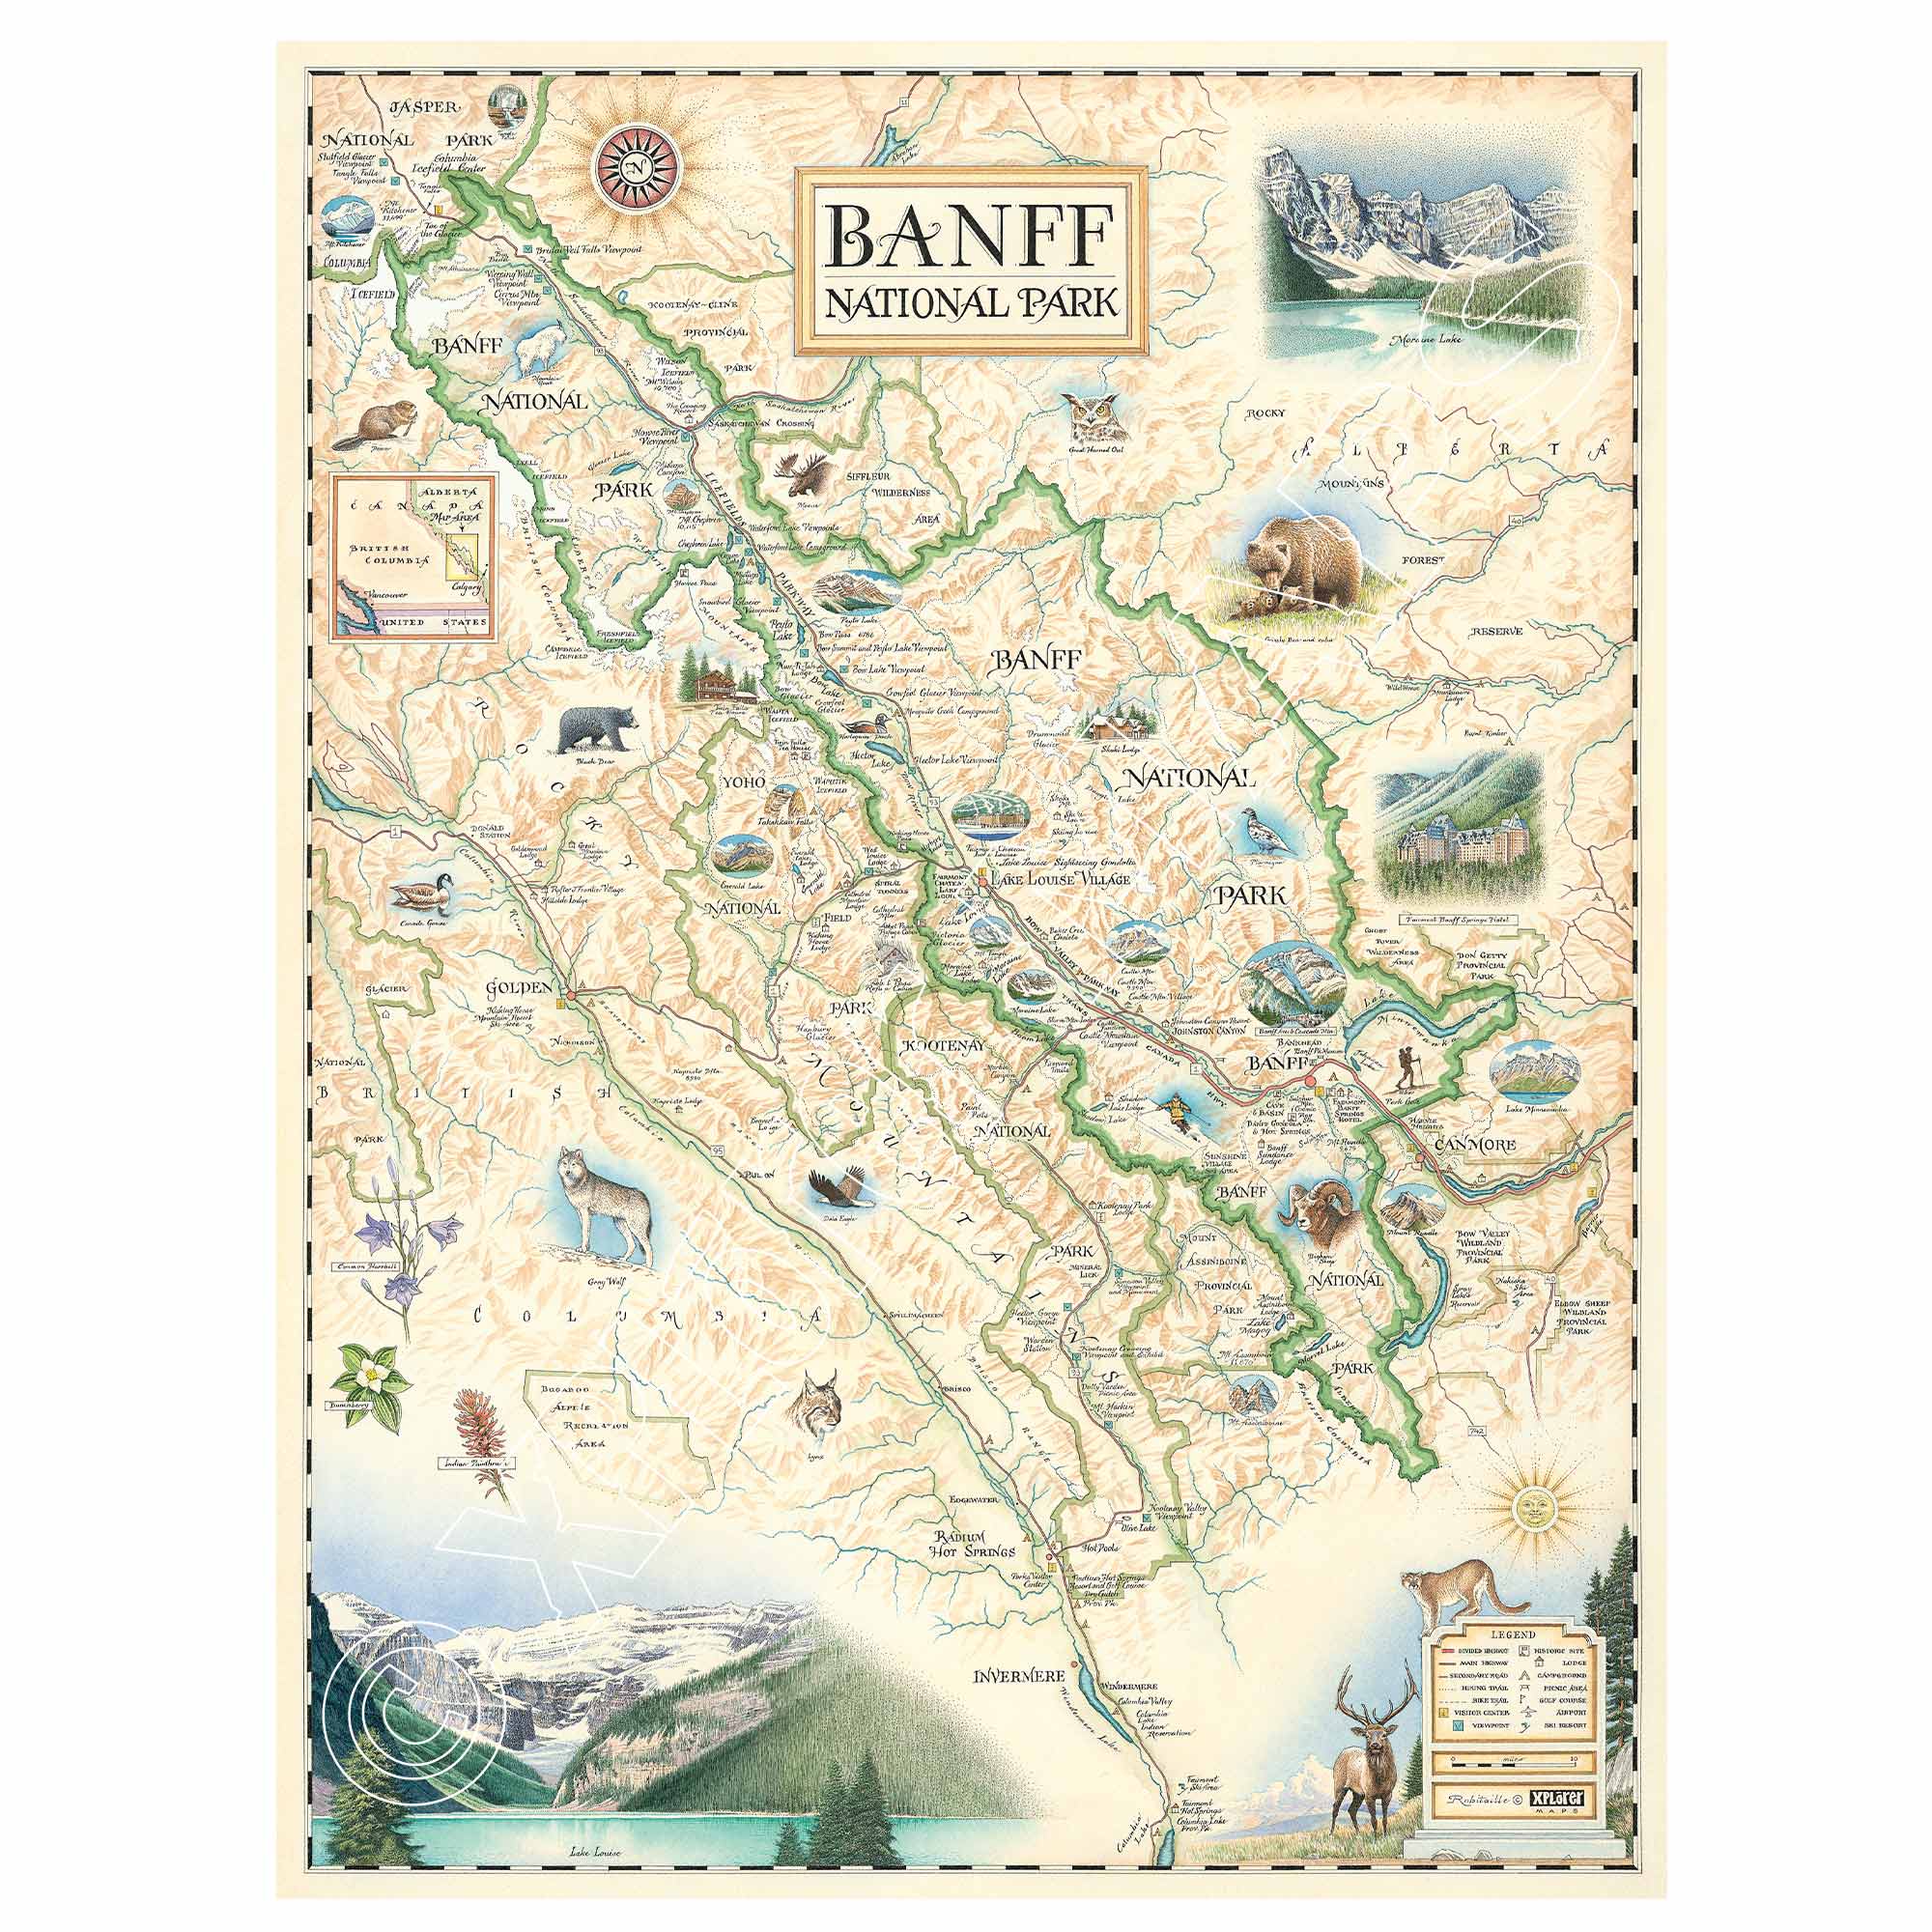 Banff National Park Hand-Drawn Map in earth tone colors. It features grizzly bears, elk, mountain lions, and wolves. his map highlights Lake Louise, Moraine Lake, Lake Minnewanka, Peyto Lake, Emerald Lake,  Mount Rundle, Mount Assiniboine, Cascade Mountain, Castle Mountain, Mount Temple, and Fairmont Banff Springs Hotel. Wildlife includes elk, mountain lions, Bald Eagles,  gray wolves, Bighorn Sheep, black & Grizzly bears, moose, Great Horned owls, beavers, and more. Measures 18x24.Measures 18x24.